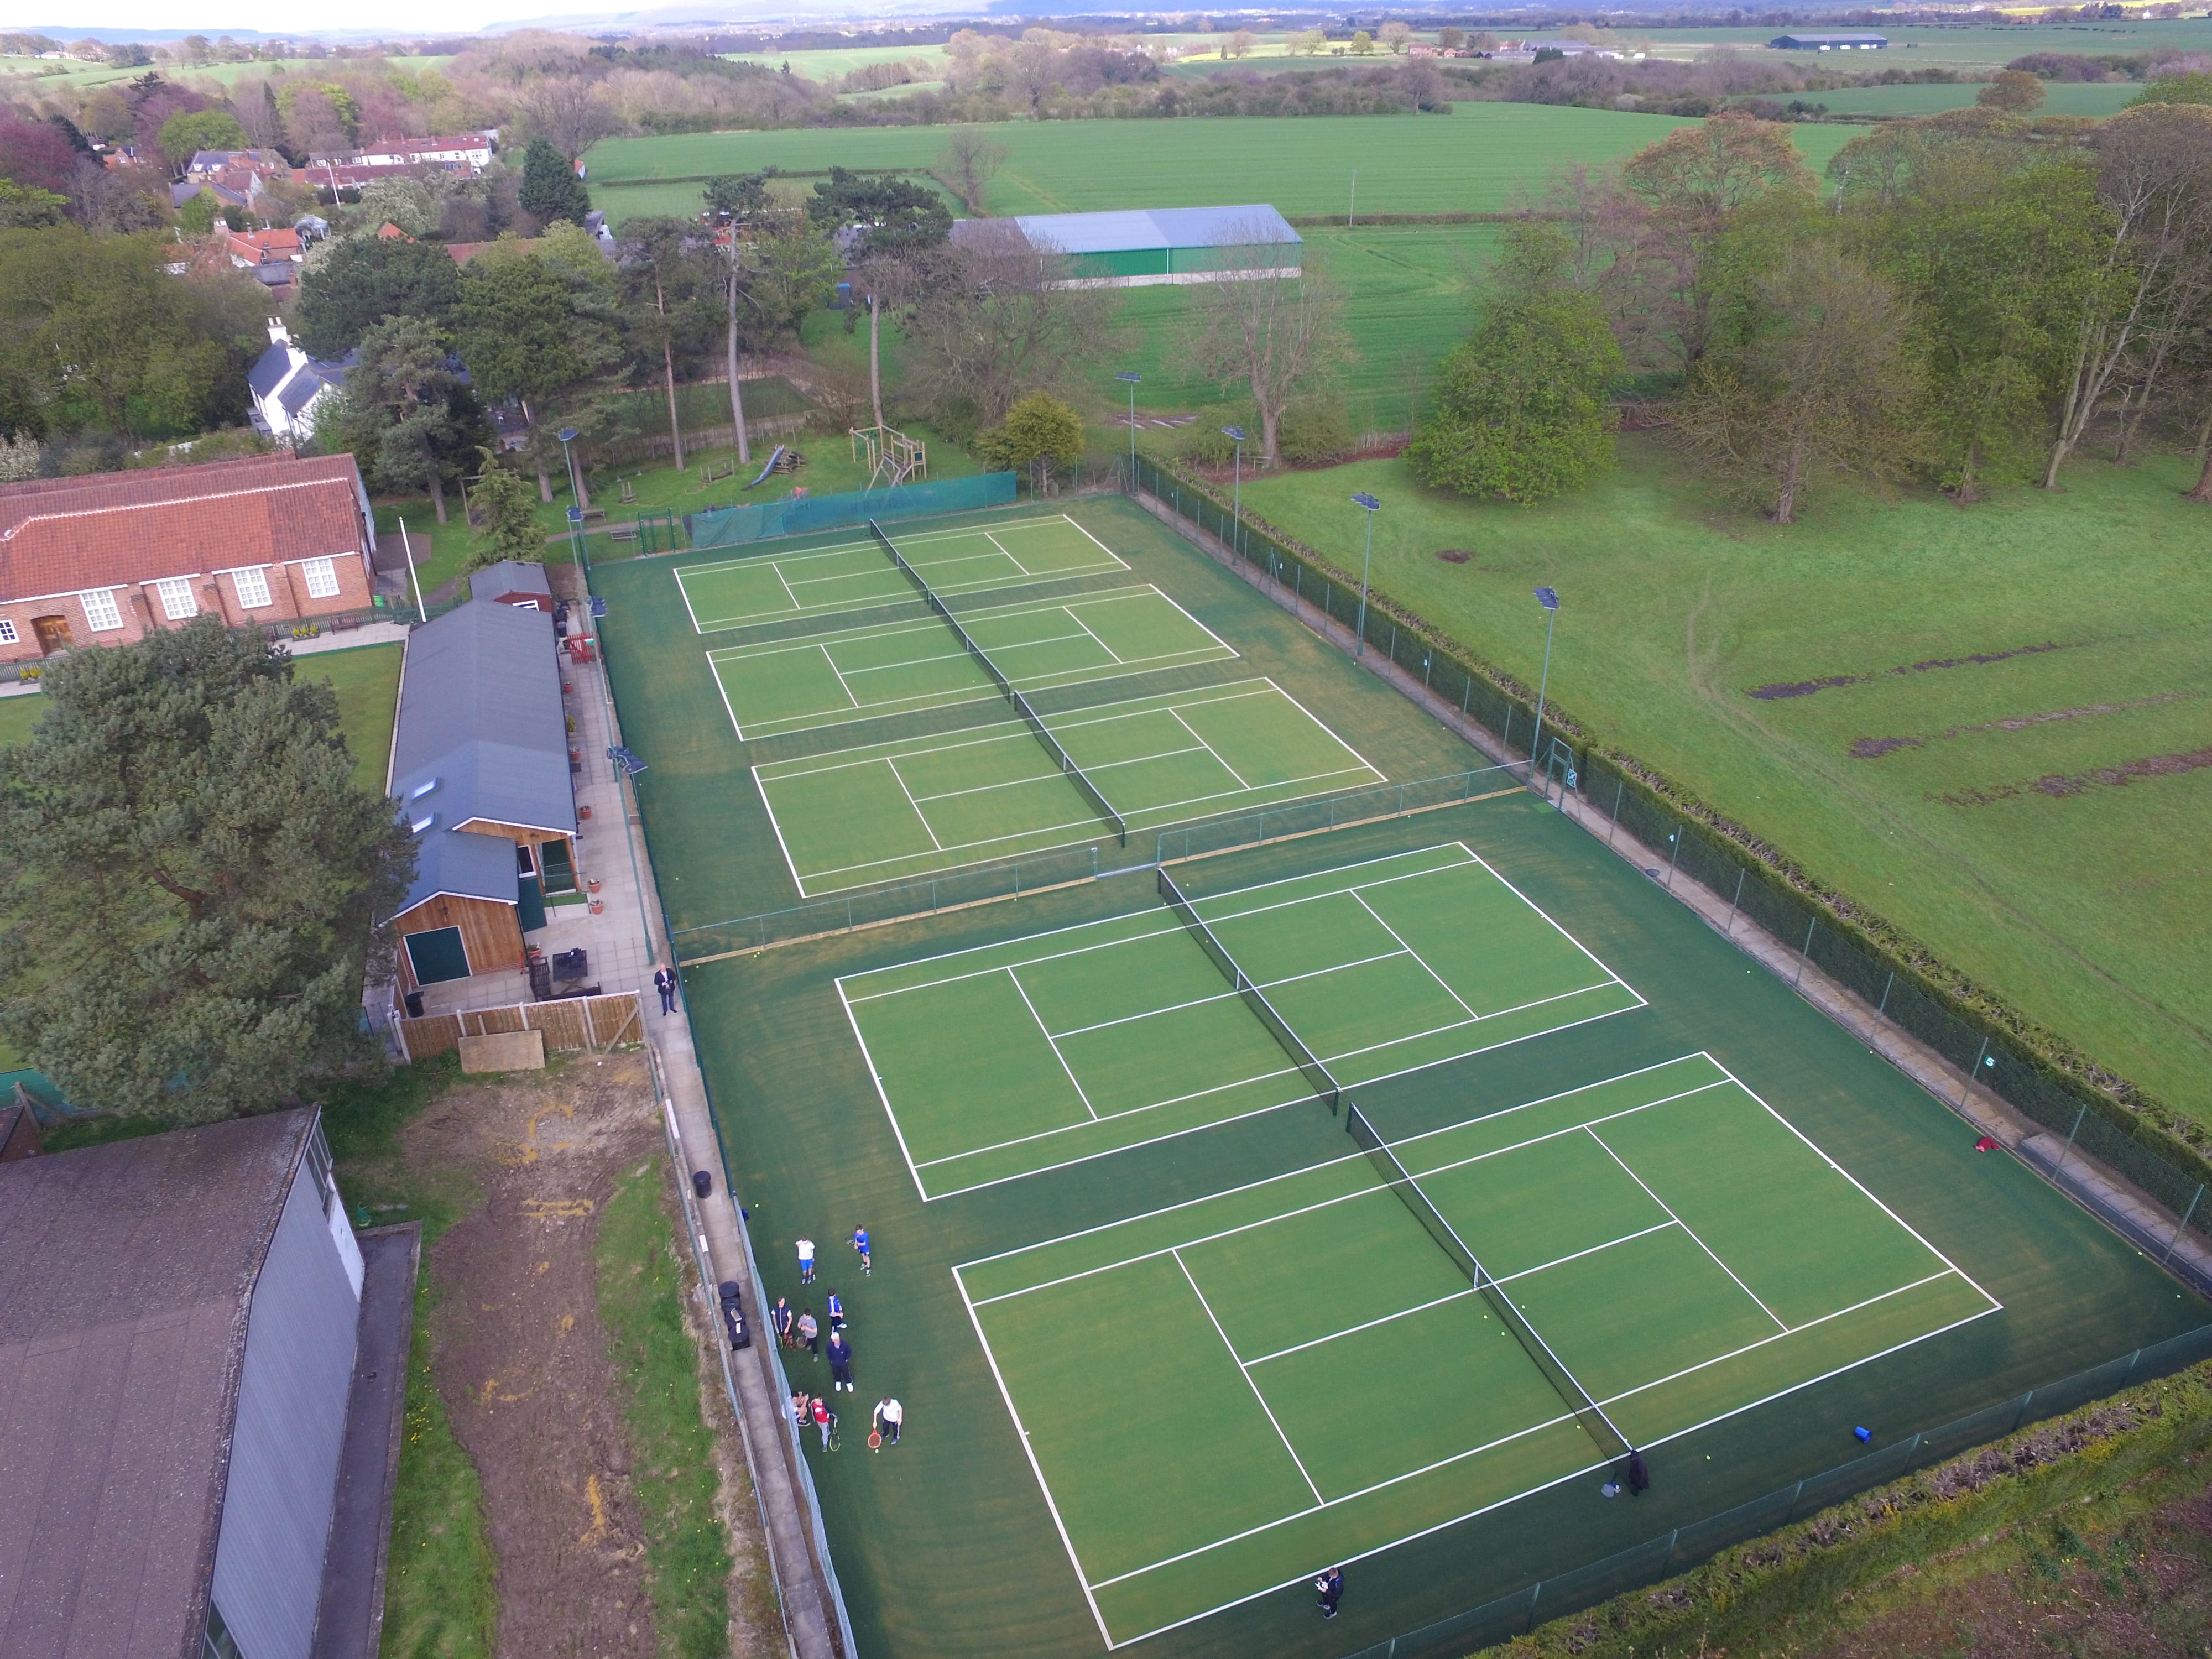 drone view of 5 green tennis courts